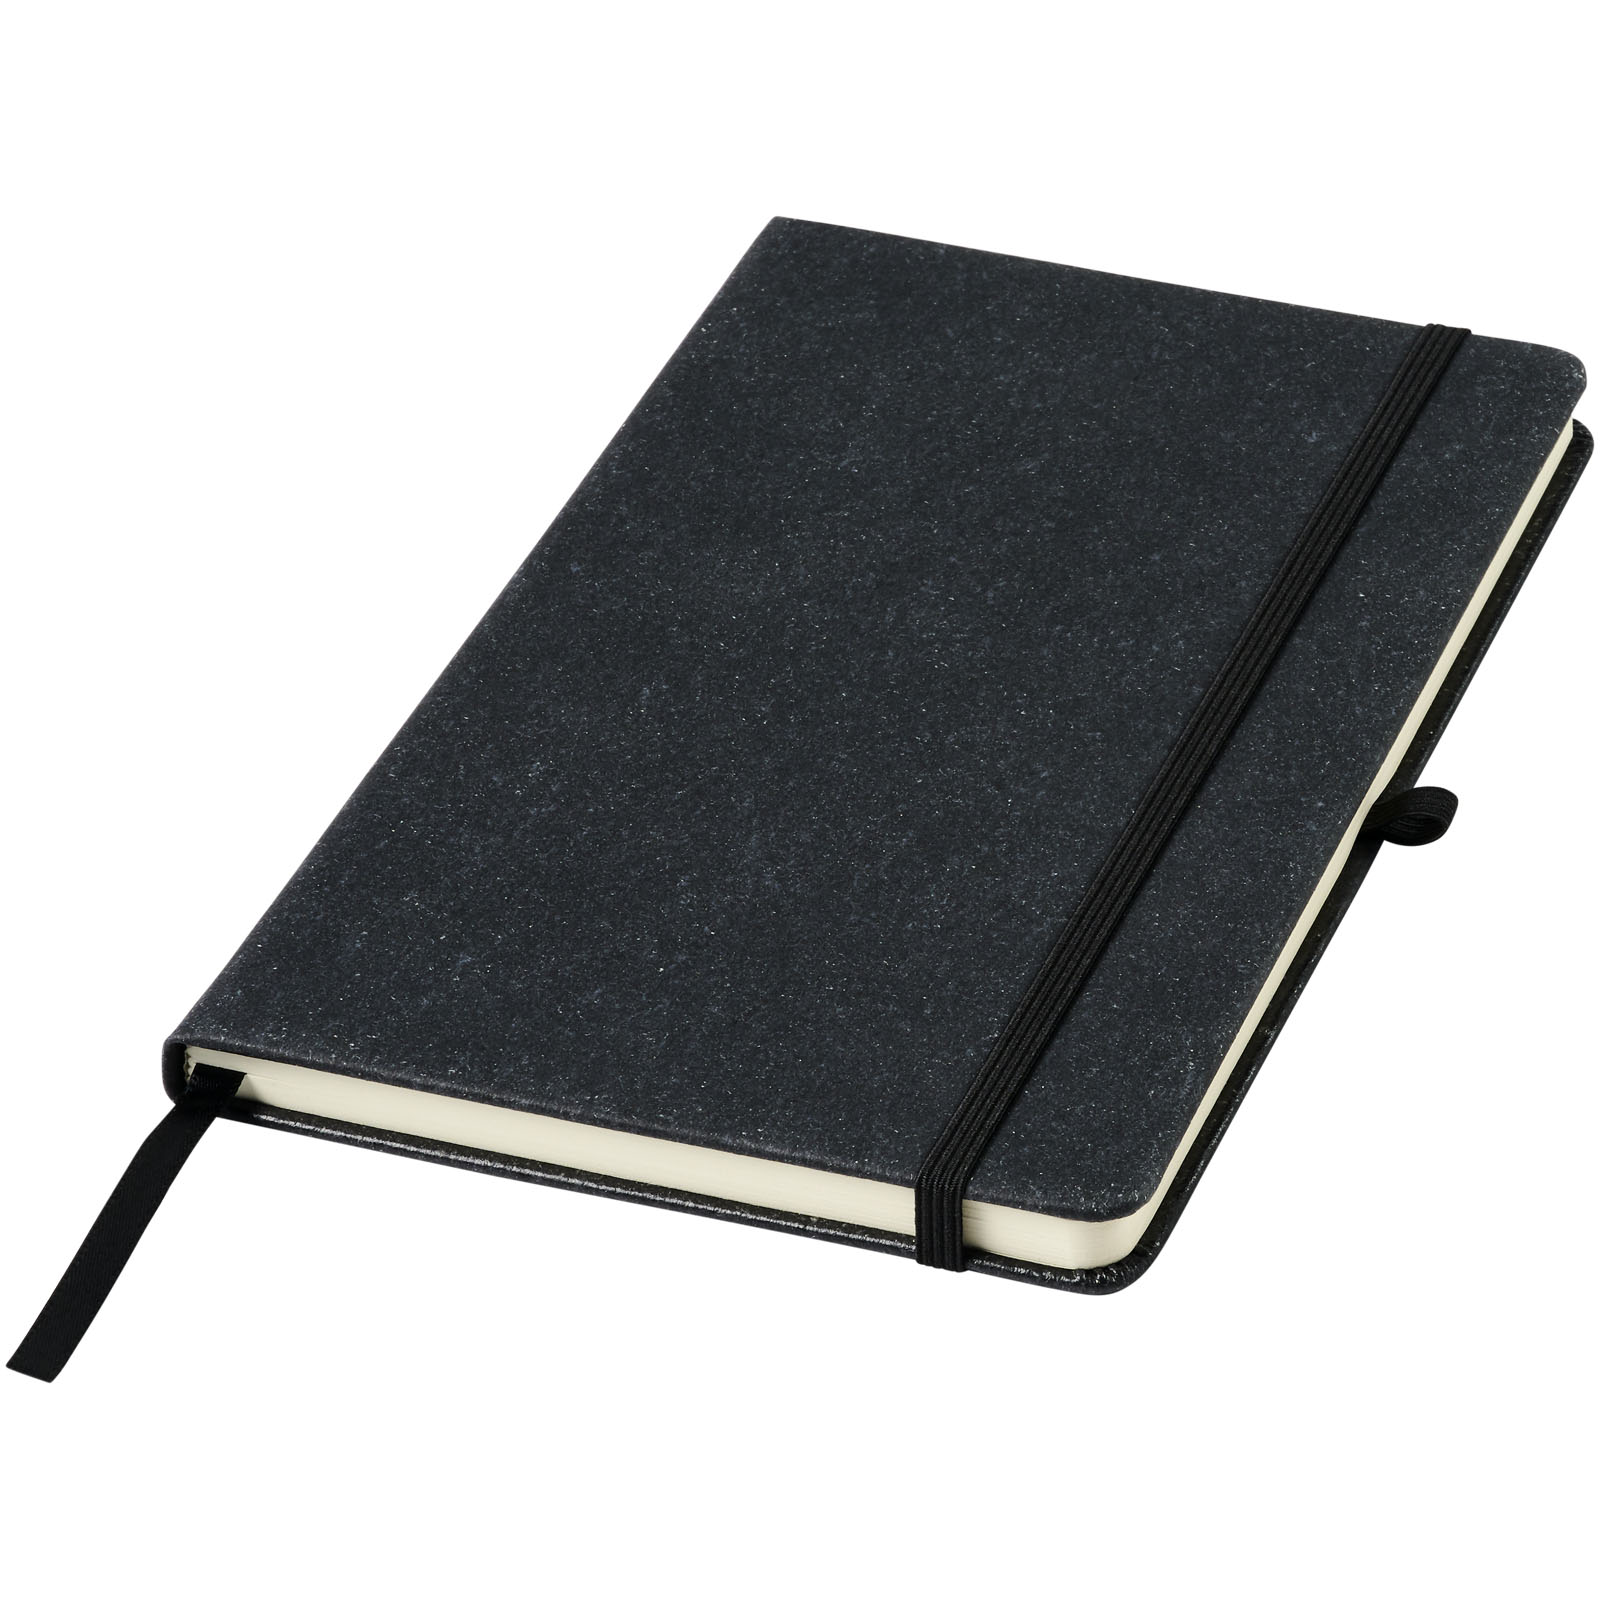 Advertising Hard cover notebooks - Atlana leather pieces notebook